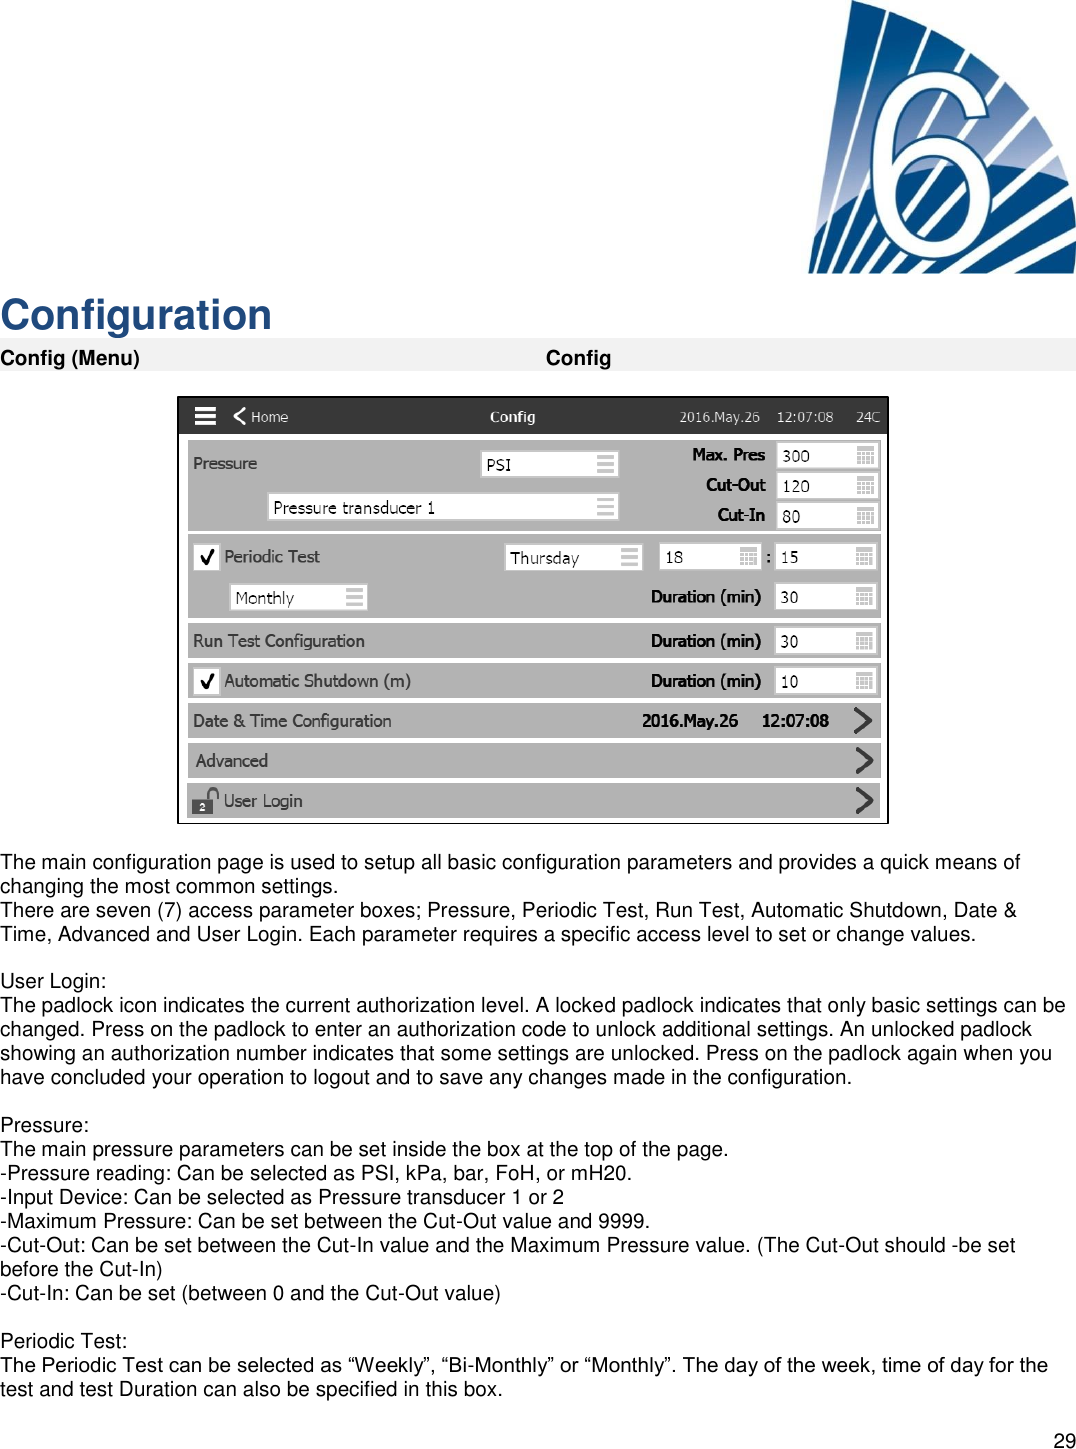    29      Configuration Config (Menu) Config    The main configuration page is used to setup all basic configuration parameters and provides a quick means of changing the most common settings. There are seven (7) access parameter boxes; Pressure, Periodic Test, Run Test, Automatic Shutdown, Date &amp; Time, Advanced and User Login. Each parameter requires a specific access level to set or change values.  User Login: The padlock icon indicates the current authorization level. A locked padlock indicates that only basic settings can be changed. Press on the padlock to enter an authorization code to unlock additional settings. An unlocked padlock showing an authorization number indicates that some settings are unlocked. Press on the padlock again when you have concluded your operation to logout and to save any changes made in the configuration.  Pressure: The main pressure parameters can be set inside the box at the top of the page. -Pressure reading: Can be selected as PSI, kPa, bar, FoH, or mH20. -Input Device: Can be selected as Pressure transducer 1 or 2 -Maximum Pressure: Can be set between the Cut-Out value and 9999. -Cut-Out: Can be set between the Cut-In value and the Maximum Pressure value. (The Cut-Out should -be set before the Cut-In) -Cut-In: Can be set (between 0 and the Cut-Out value)   Periodic Test: The Periodic Test can be selected as “Weekly”, “Bi-Monthly” or “Monthly”. The day of the week, time of day for the test and test Duration can also be specified in this box.  